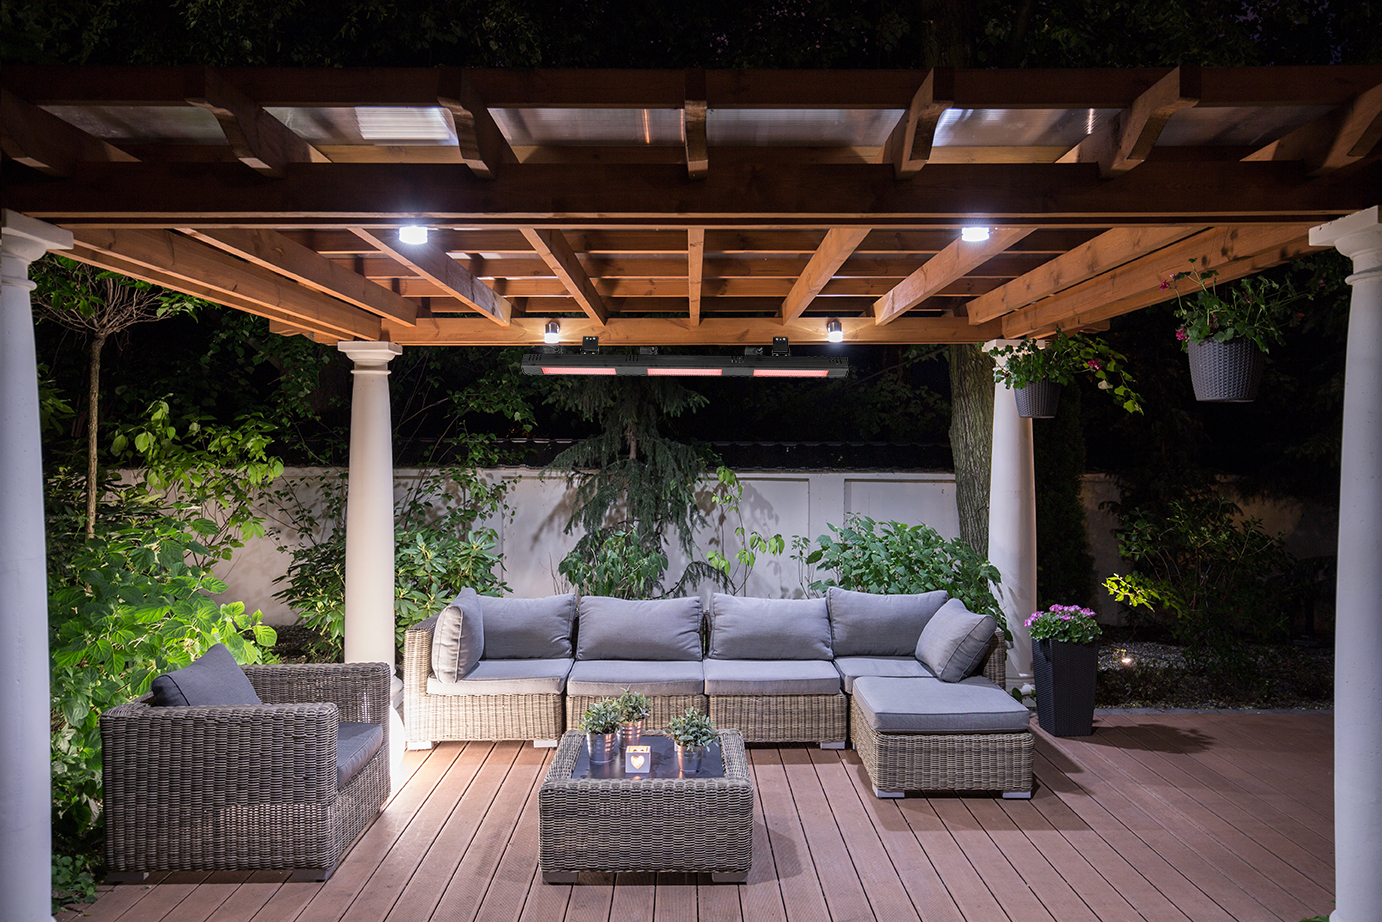 Outdoor Residential Patio with Infrared Heater